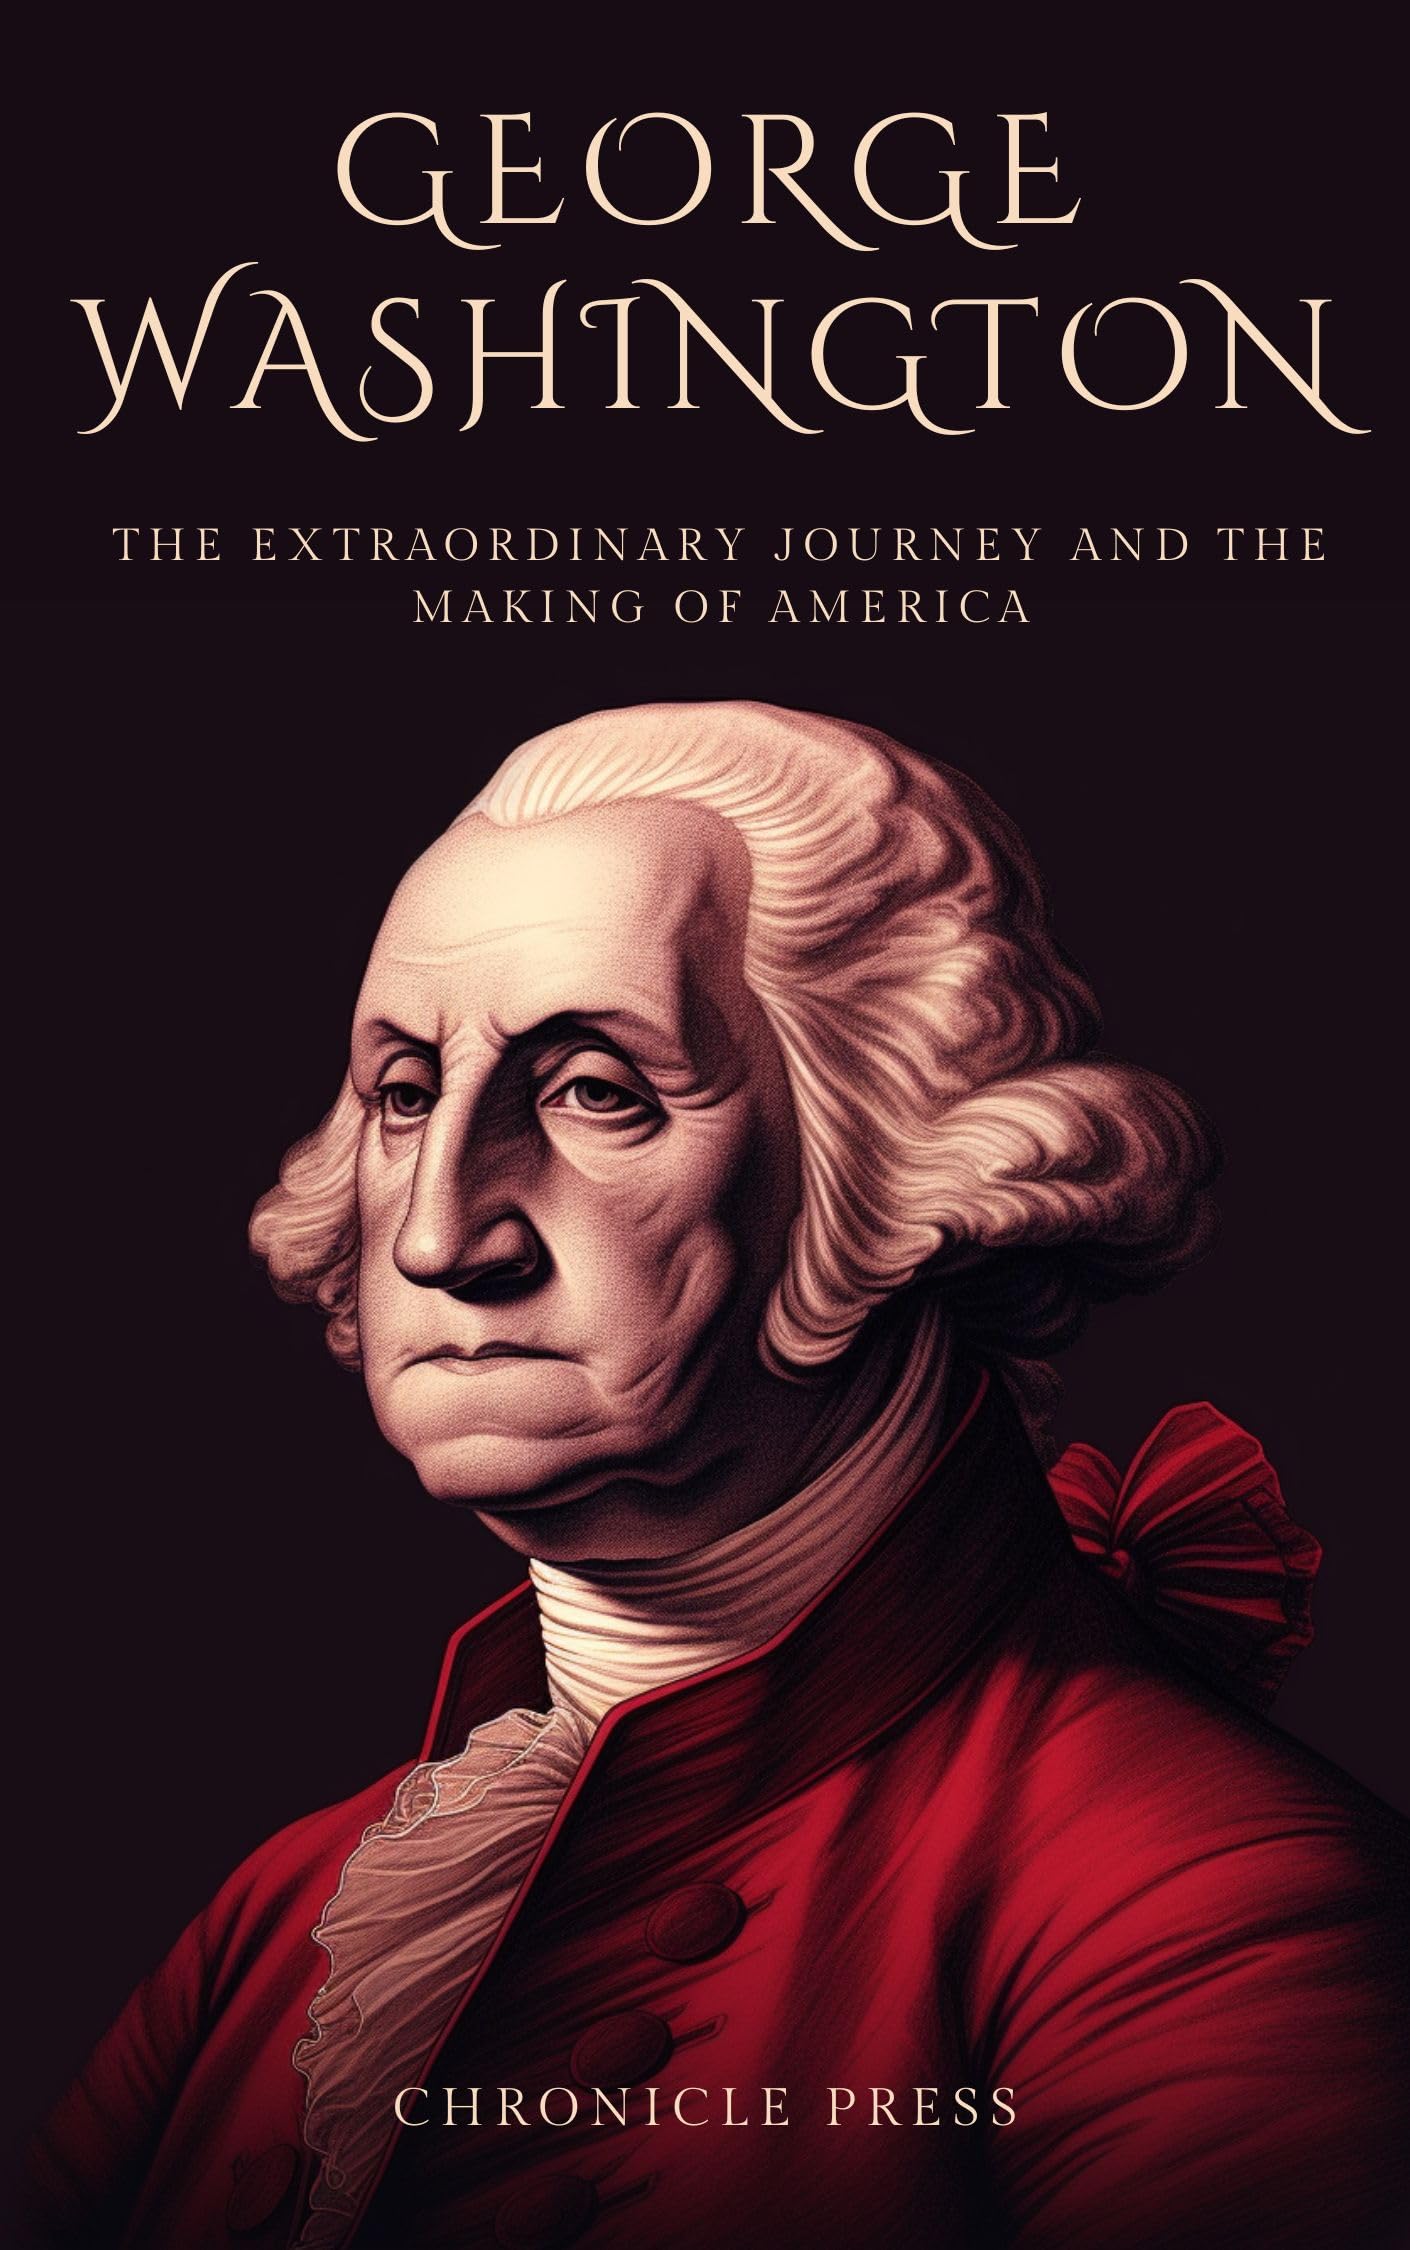 George Washington: The Extraordinary Journey and the Making of America